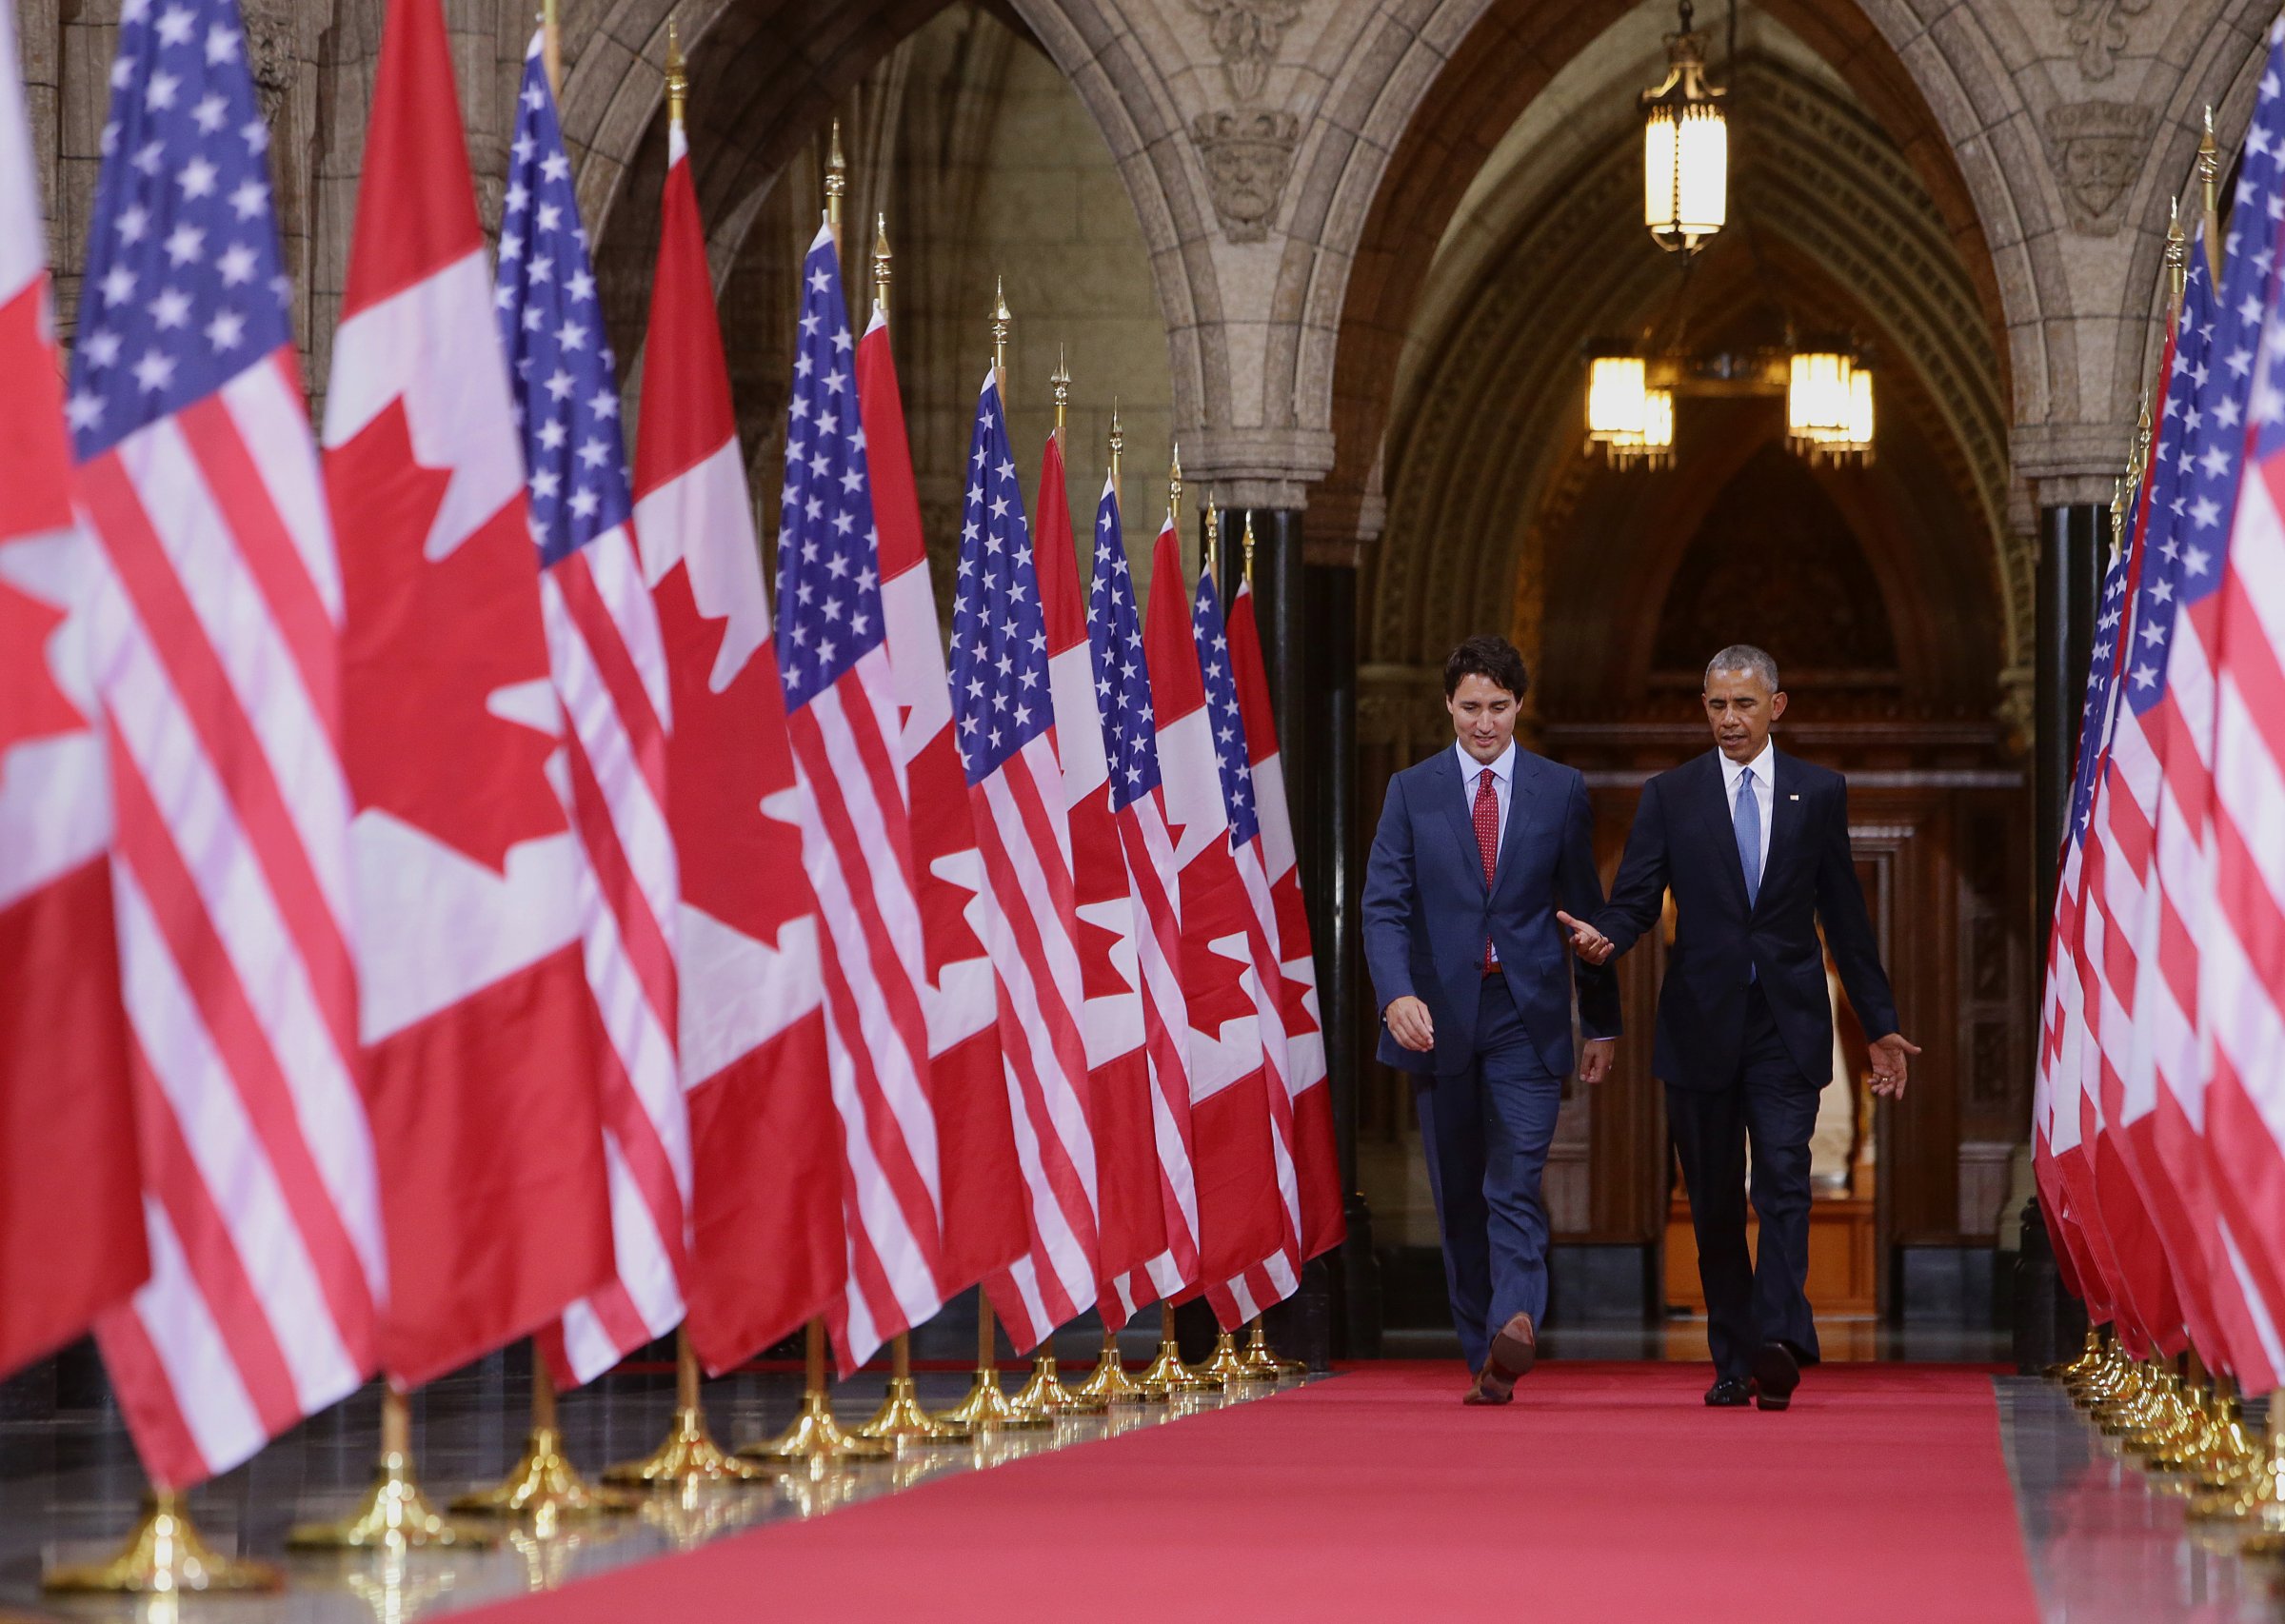 Canadian Prime Minister Justin Trudeau, U.S. President Barack Obama, And Mexican President Enrique Pena Nieto Attend The NALS